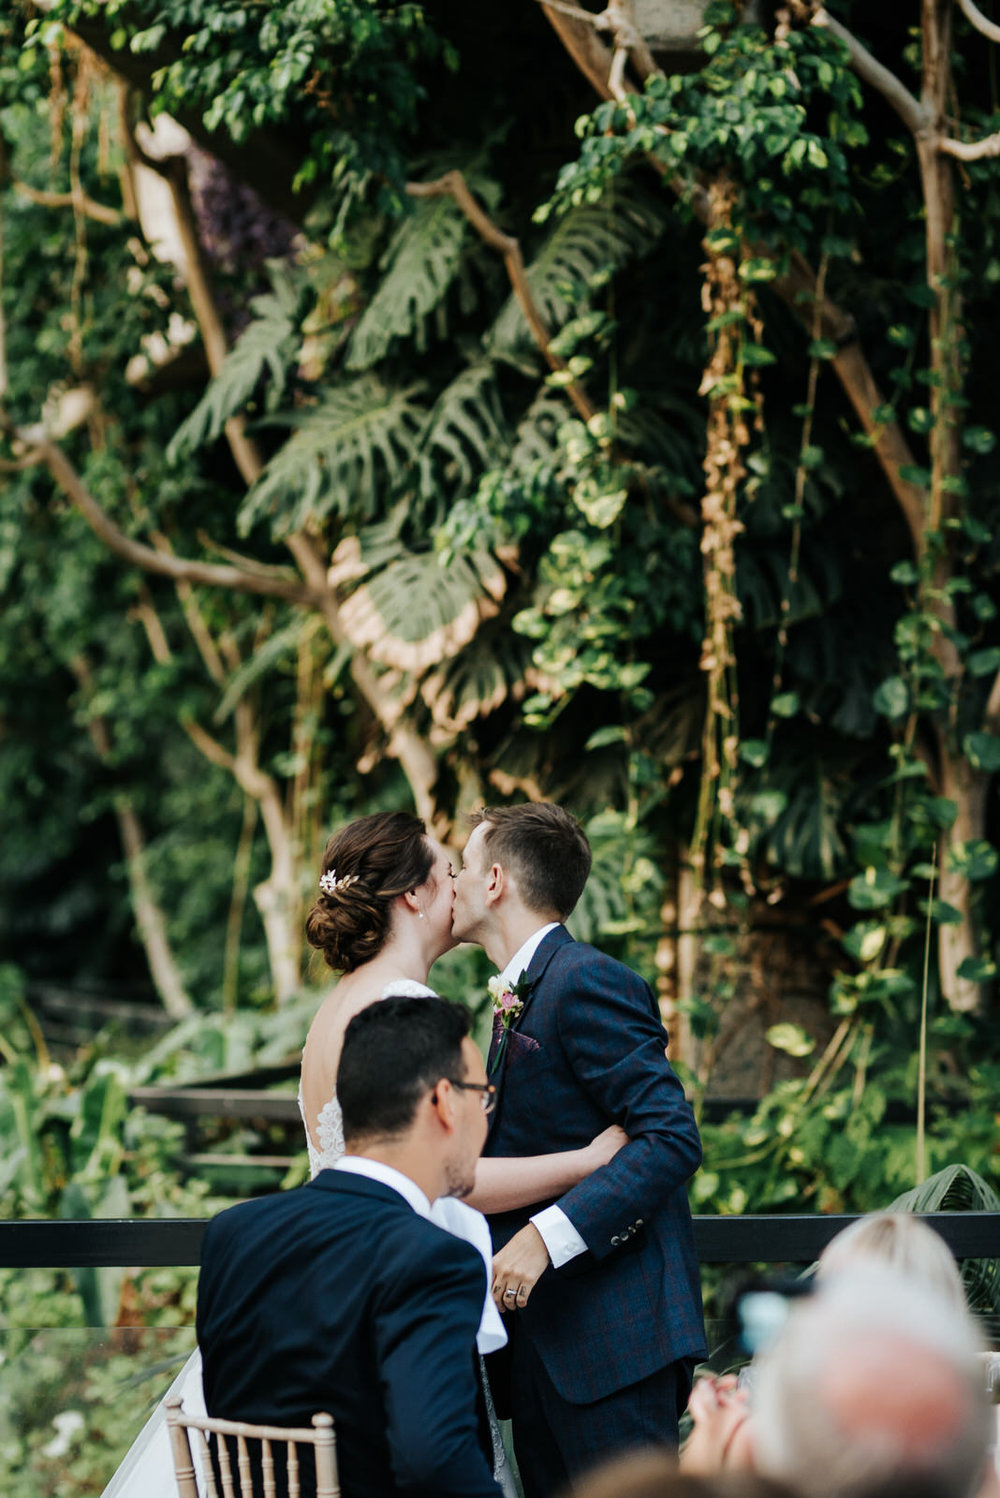 Groom kisses bride on the cheek while gorgeous greenery can be s